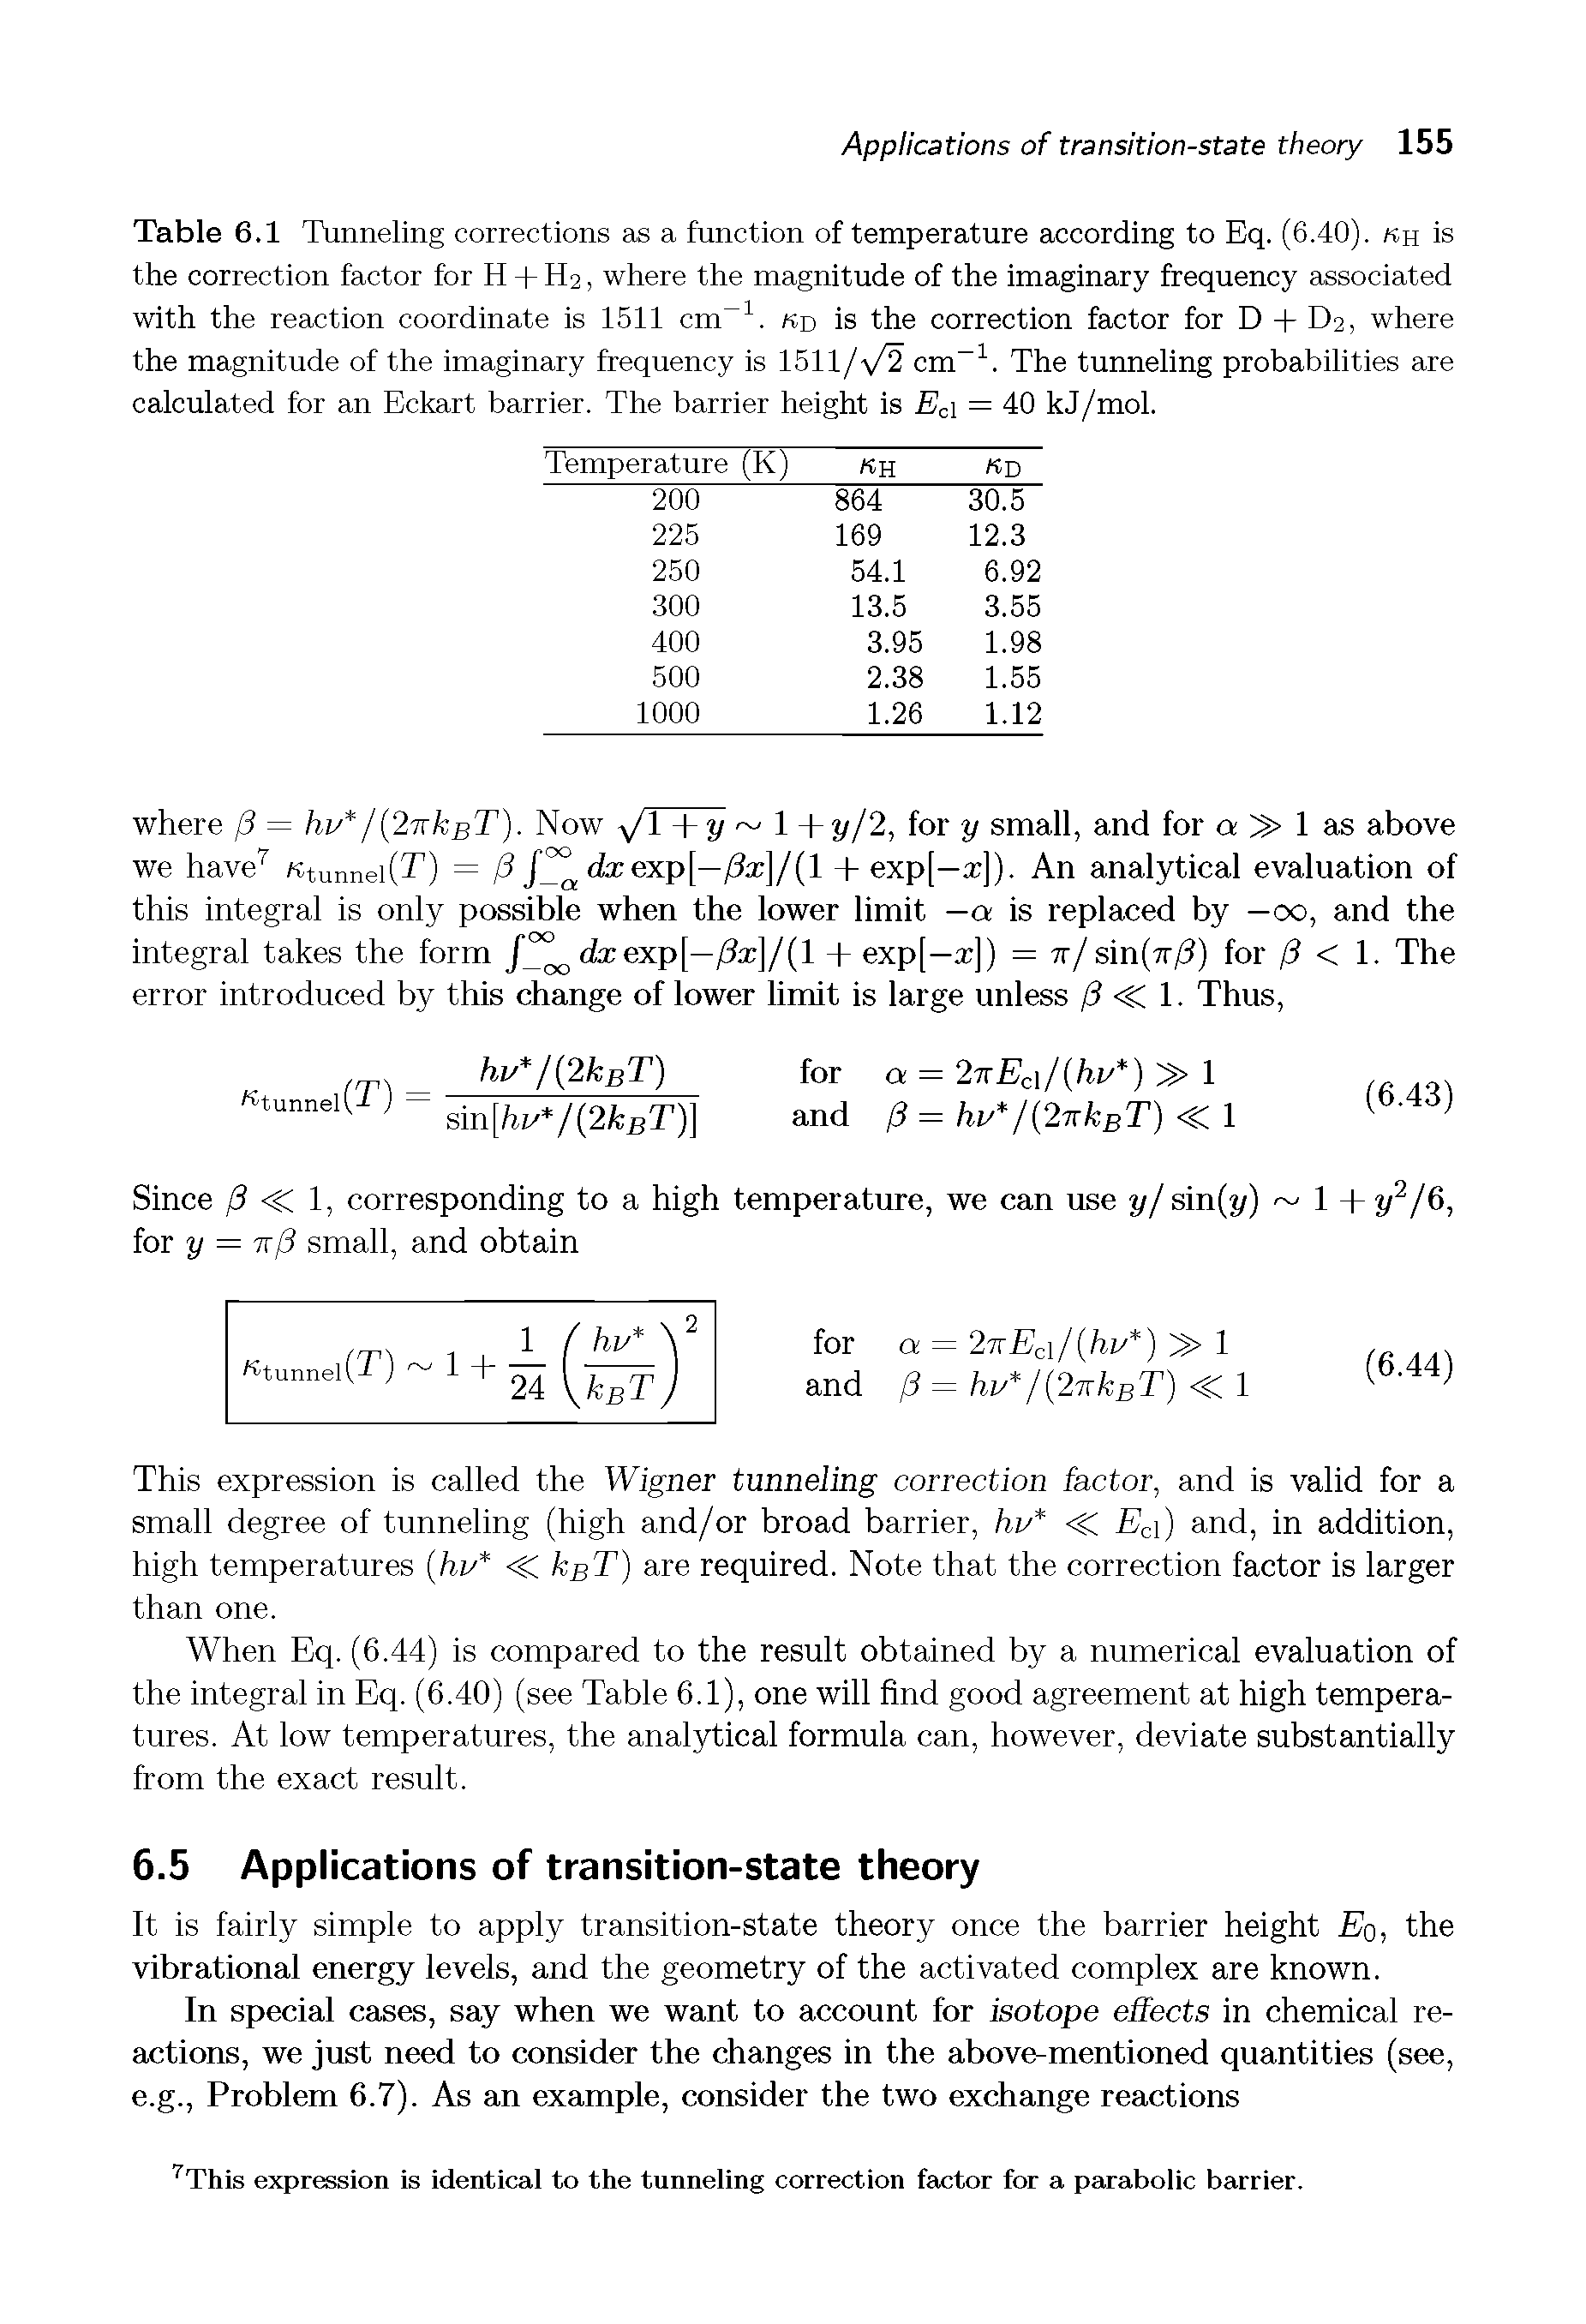 Table 6.1 Tunneling corrections as a function of temperature according to Eq. (6.40). kh is the correction factor for H + H2, where the magnitude of the imaginary frequency associated with the reaction coordinate is 1511 cm-1, kd is the correction factor for D + D2, where the magnitude of the imaginary frequency is 1511/cm-1. The tunneling probabilities are calculated for an Eckart barrier. The barrier height is Ec = 40 kJ/mol.